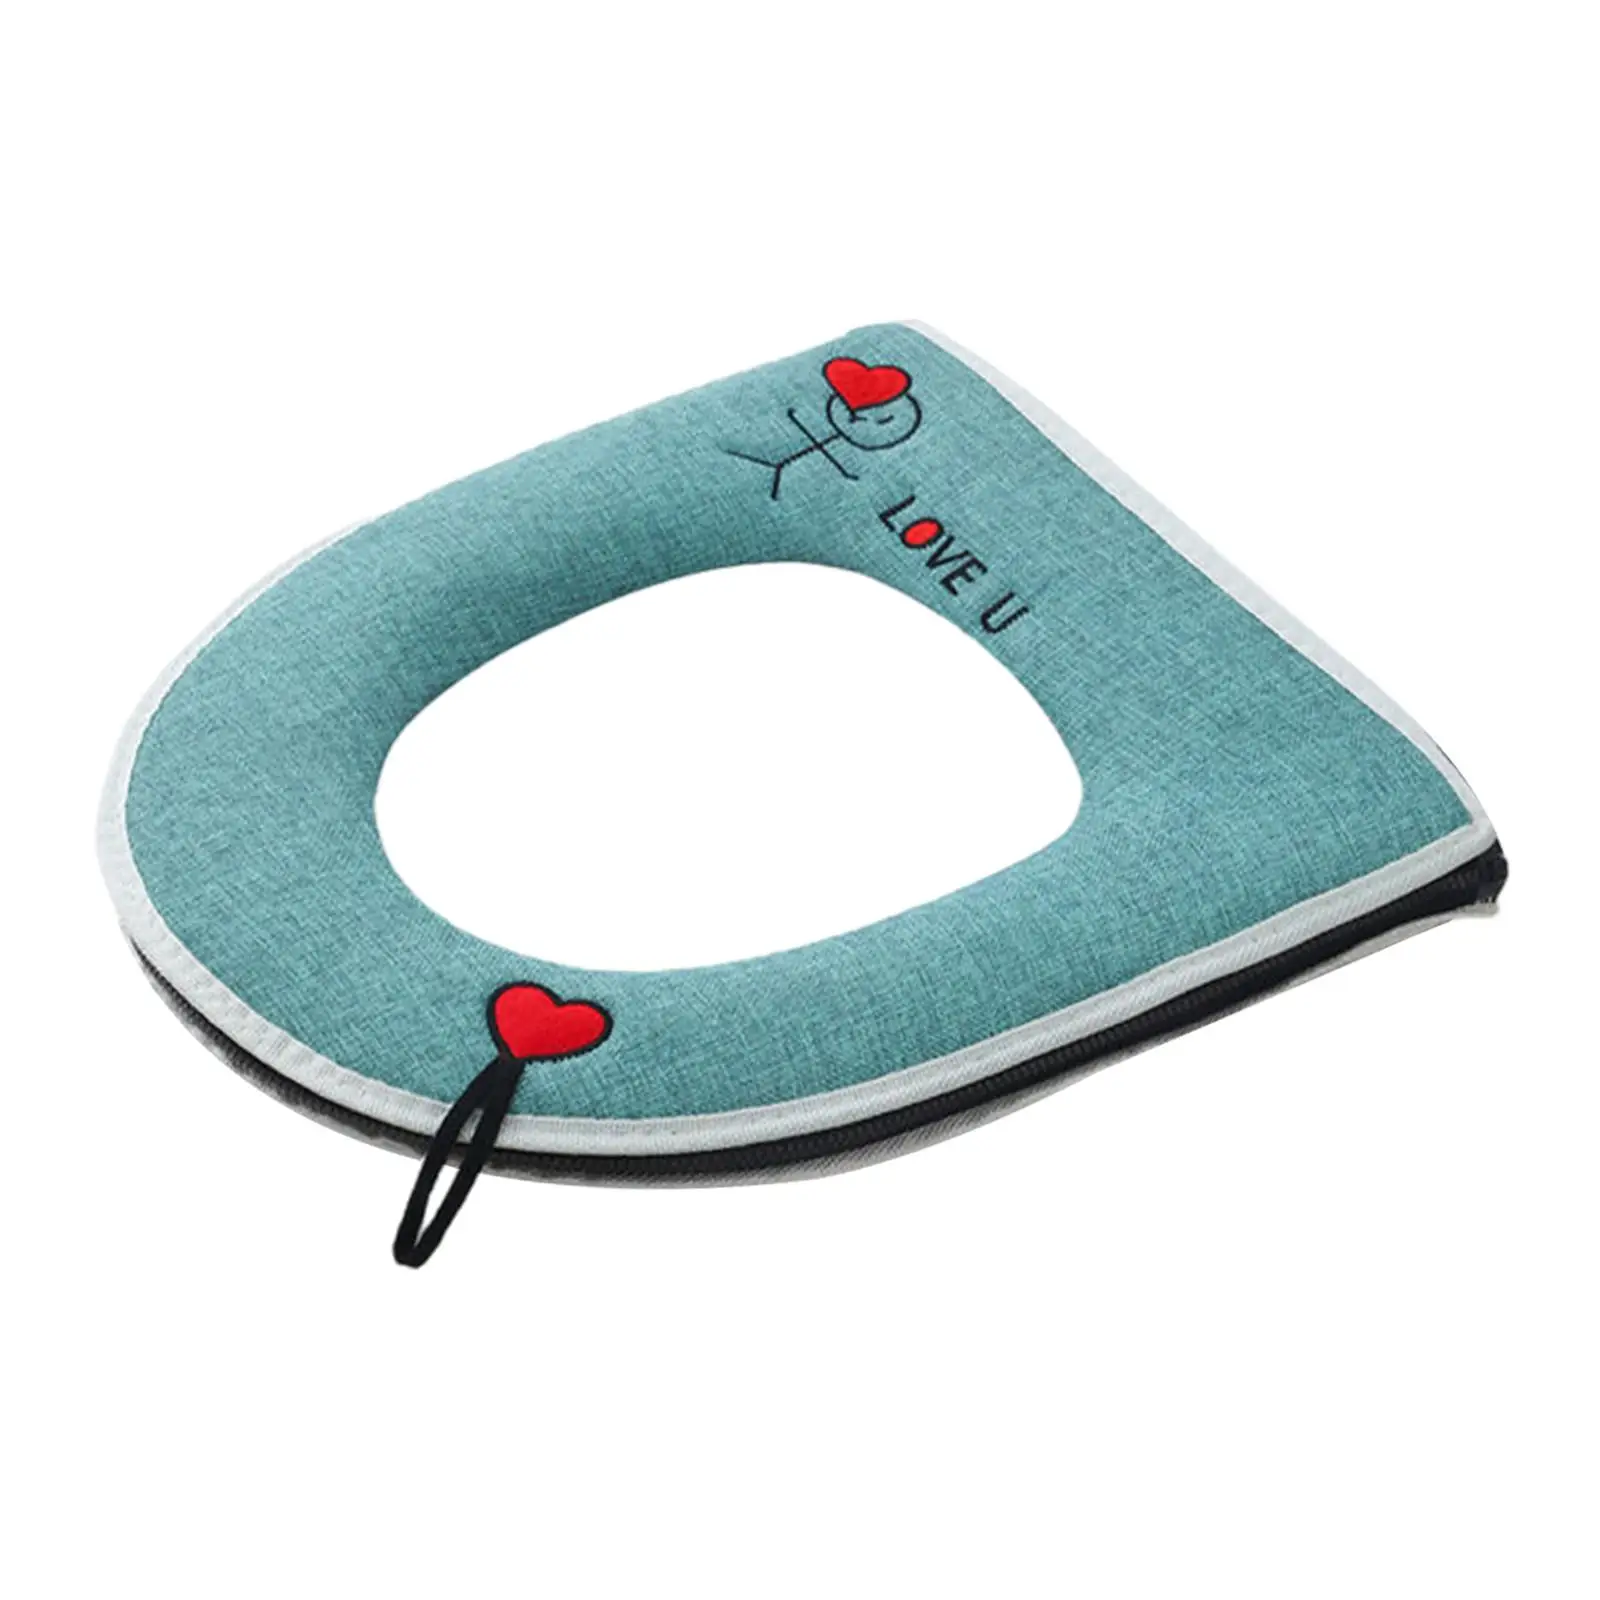 Thicken Toilet Seat Cushion Foldable Universal Toilet Seat Mat Warm Toilet Seat Covers for Bathroom Traveling Household Home